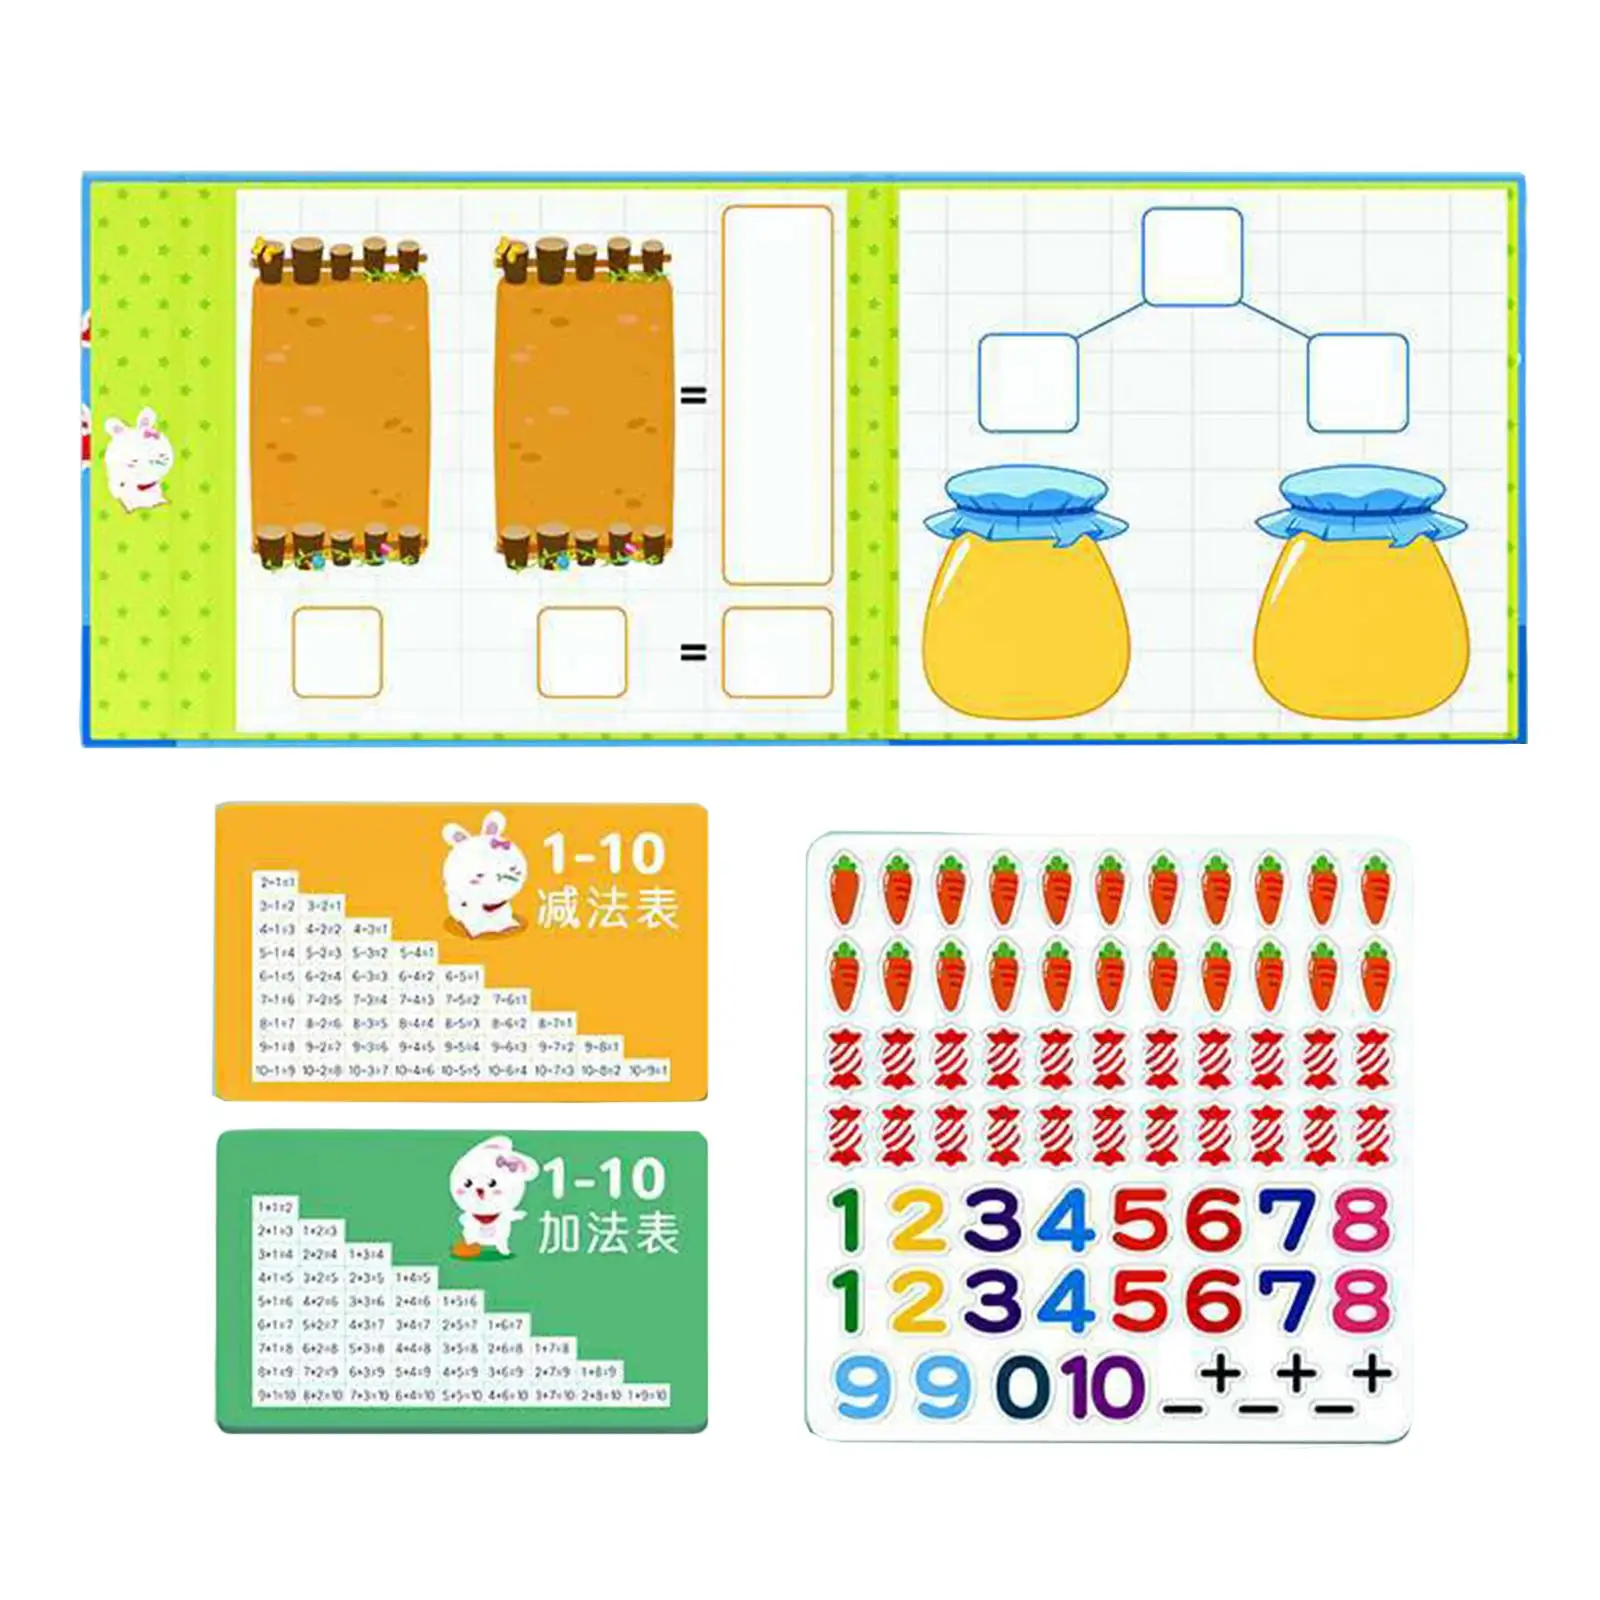 Math Addition Subtraction Toy Educational Toy Math Teacher Aids Number Learning Counting for Preschool Kindergarten Boy Children